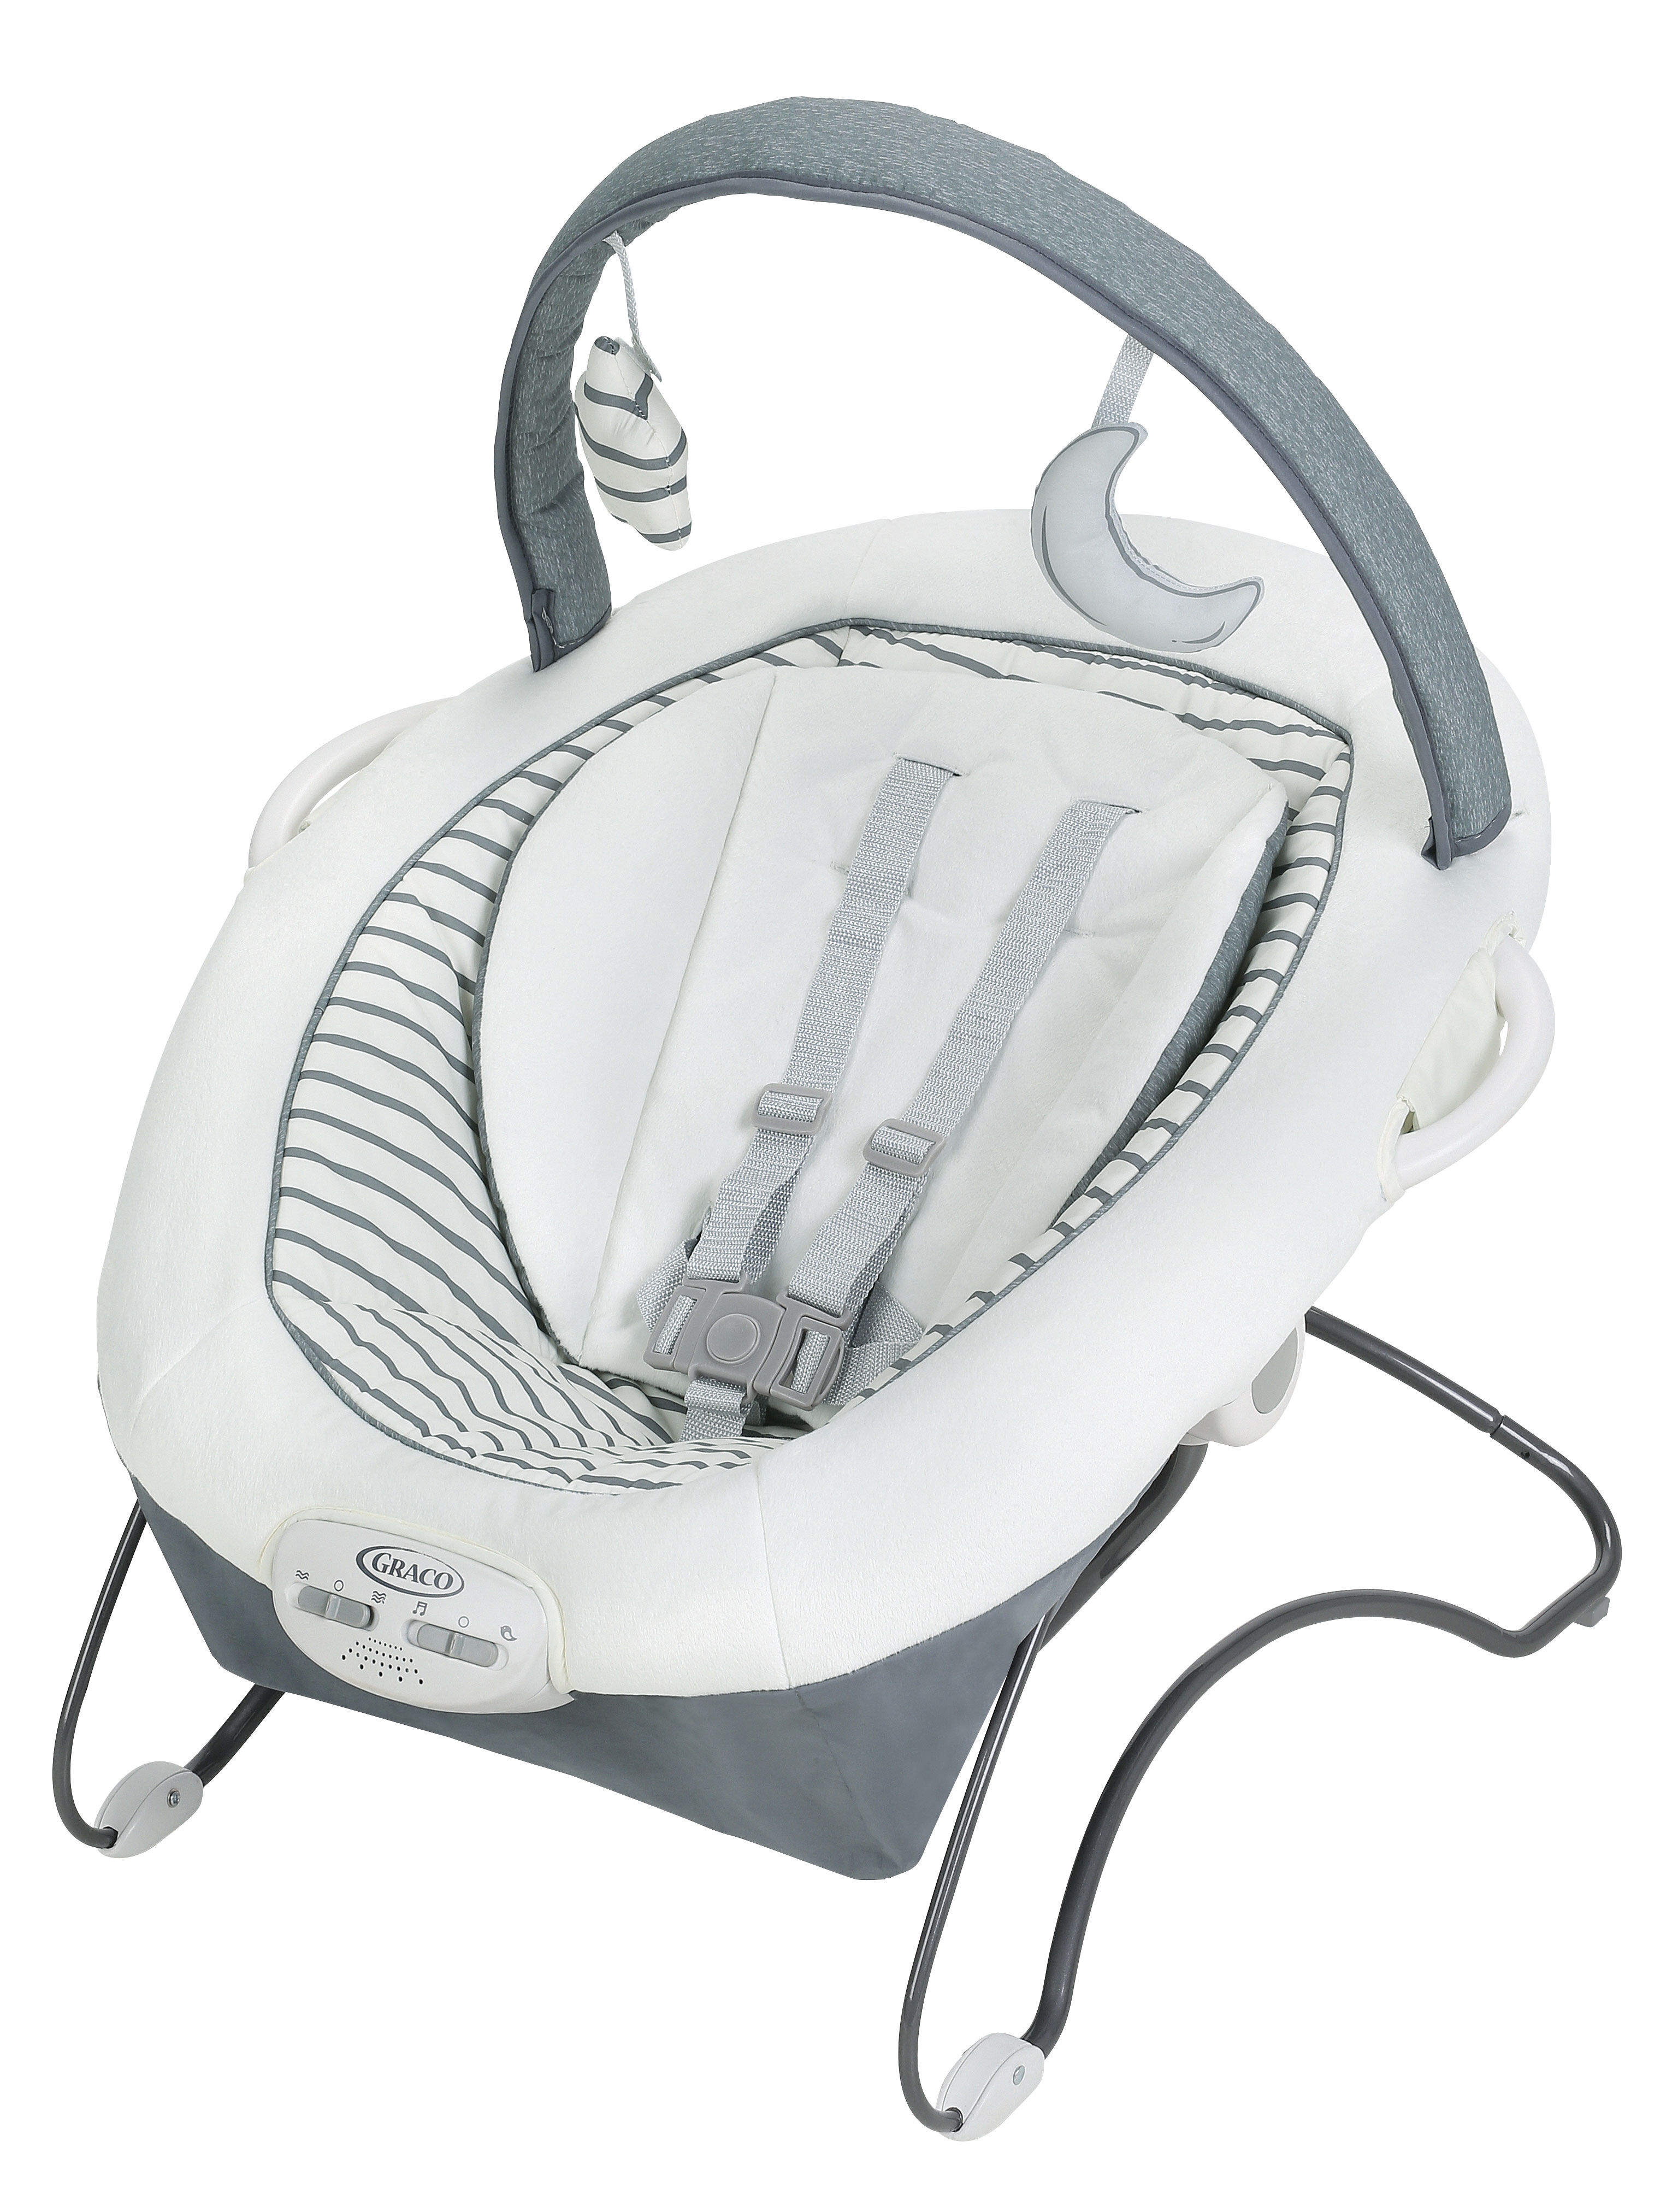 graco duet sway lx swing with portable bouncer holt